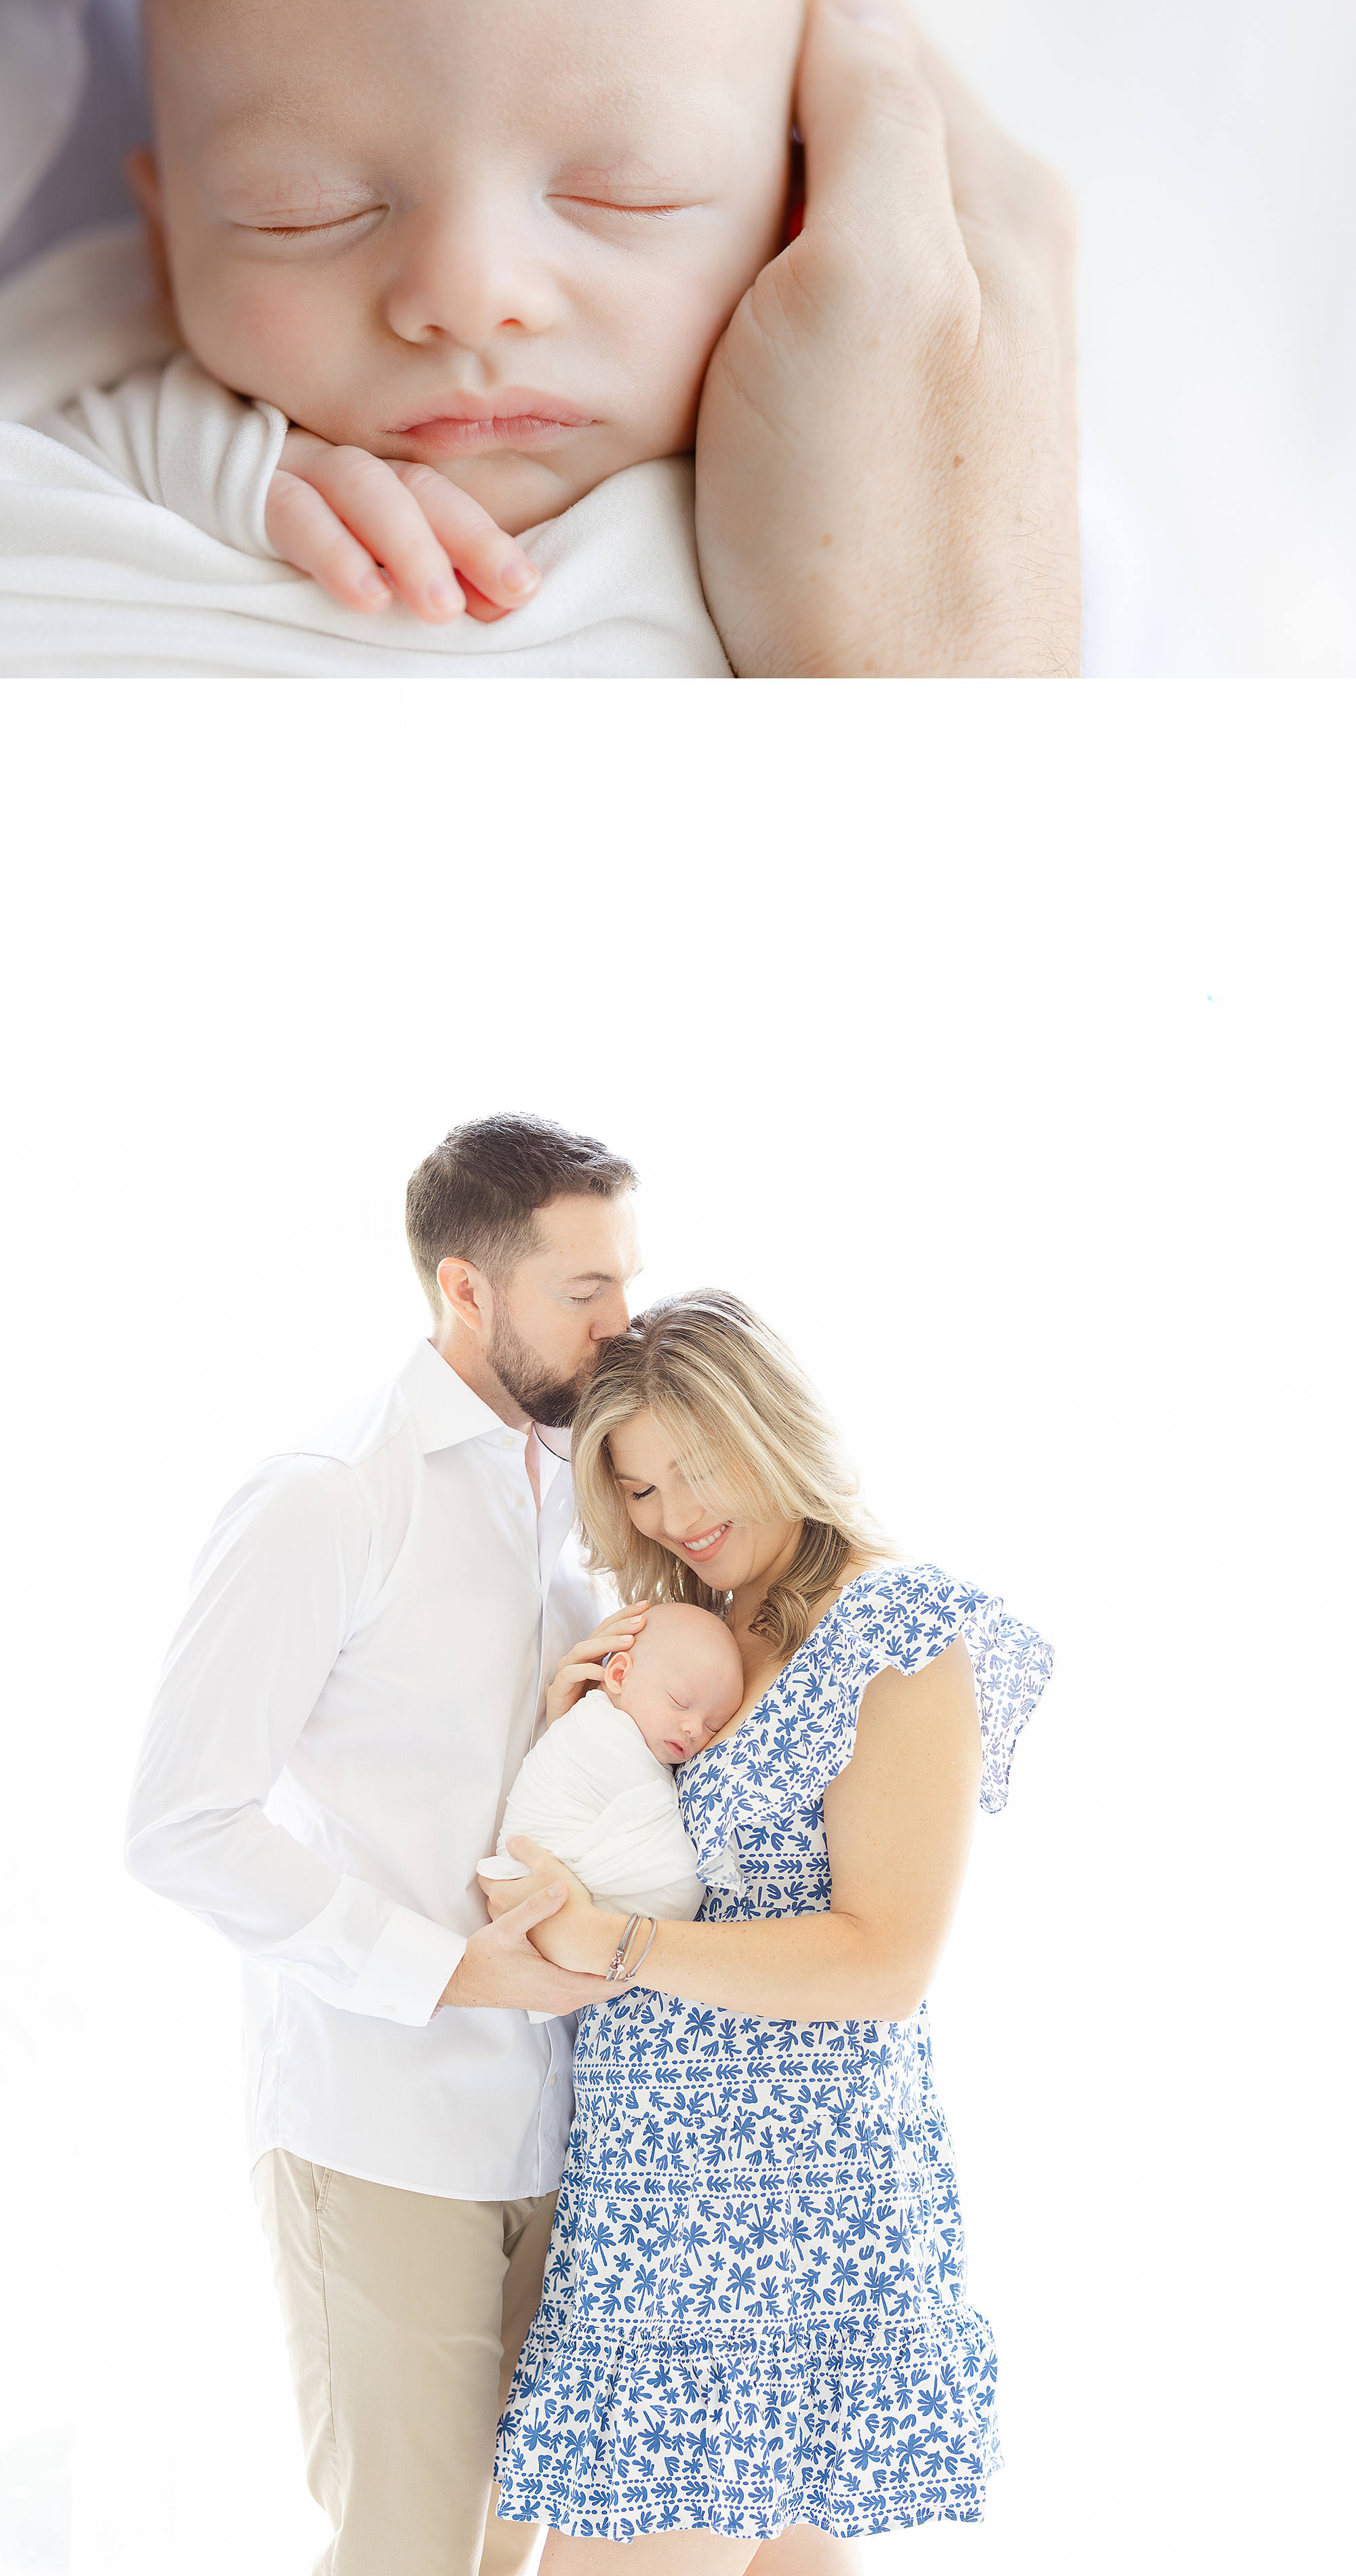 At home newborn portraits with a light and airy vibe.